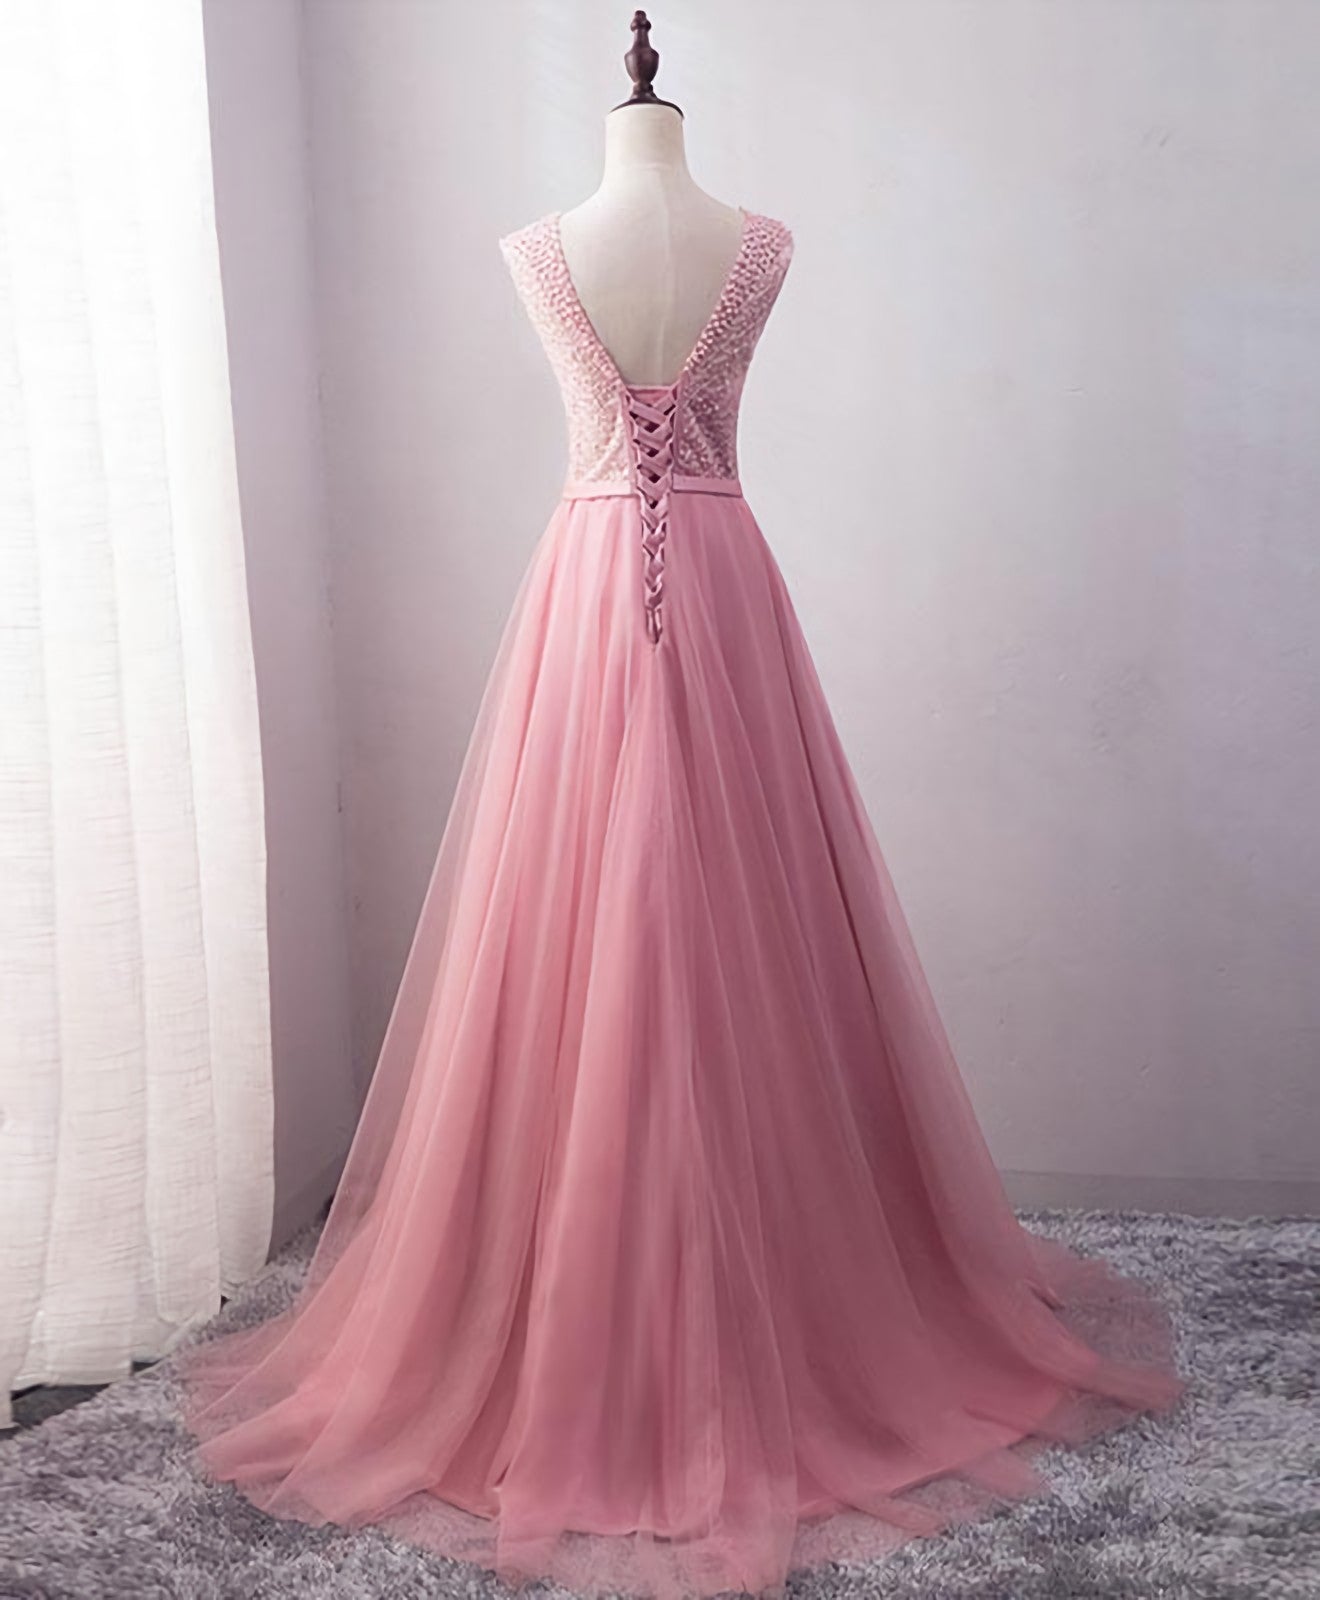 Gold Prom Dress, Pink Tulle Long A Line Prom Dress, Pink Evening Dress